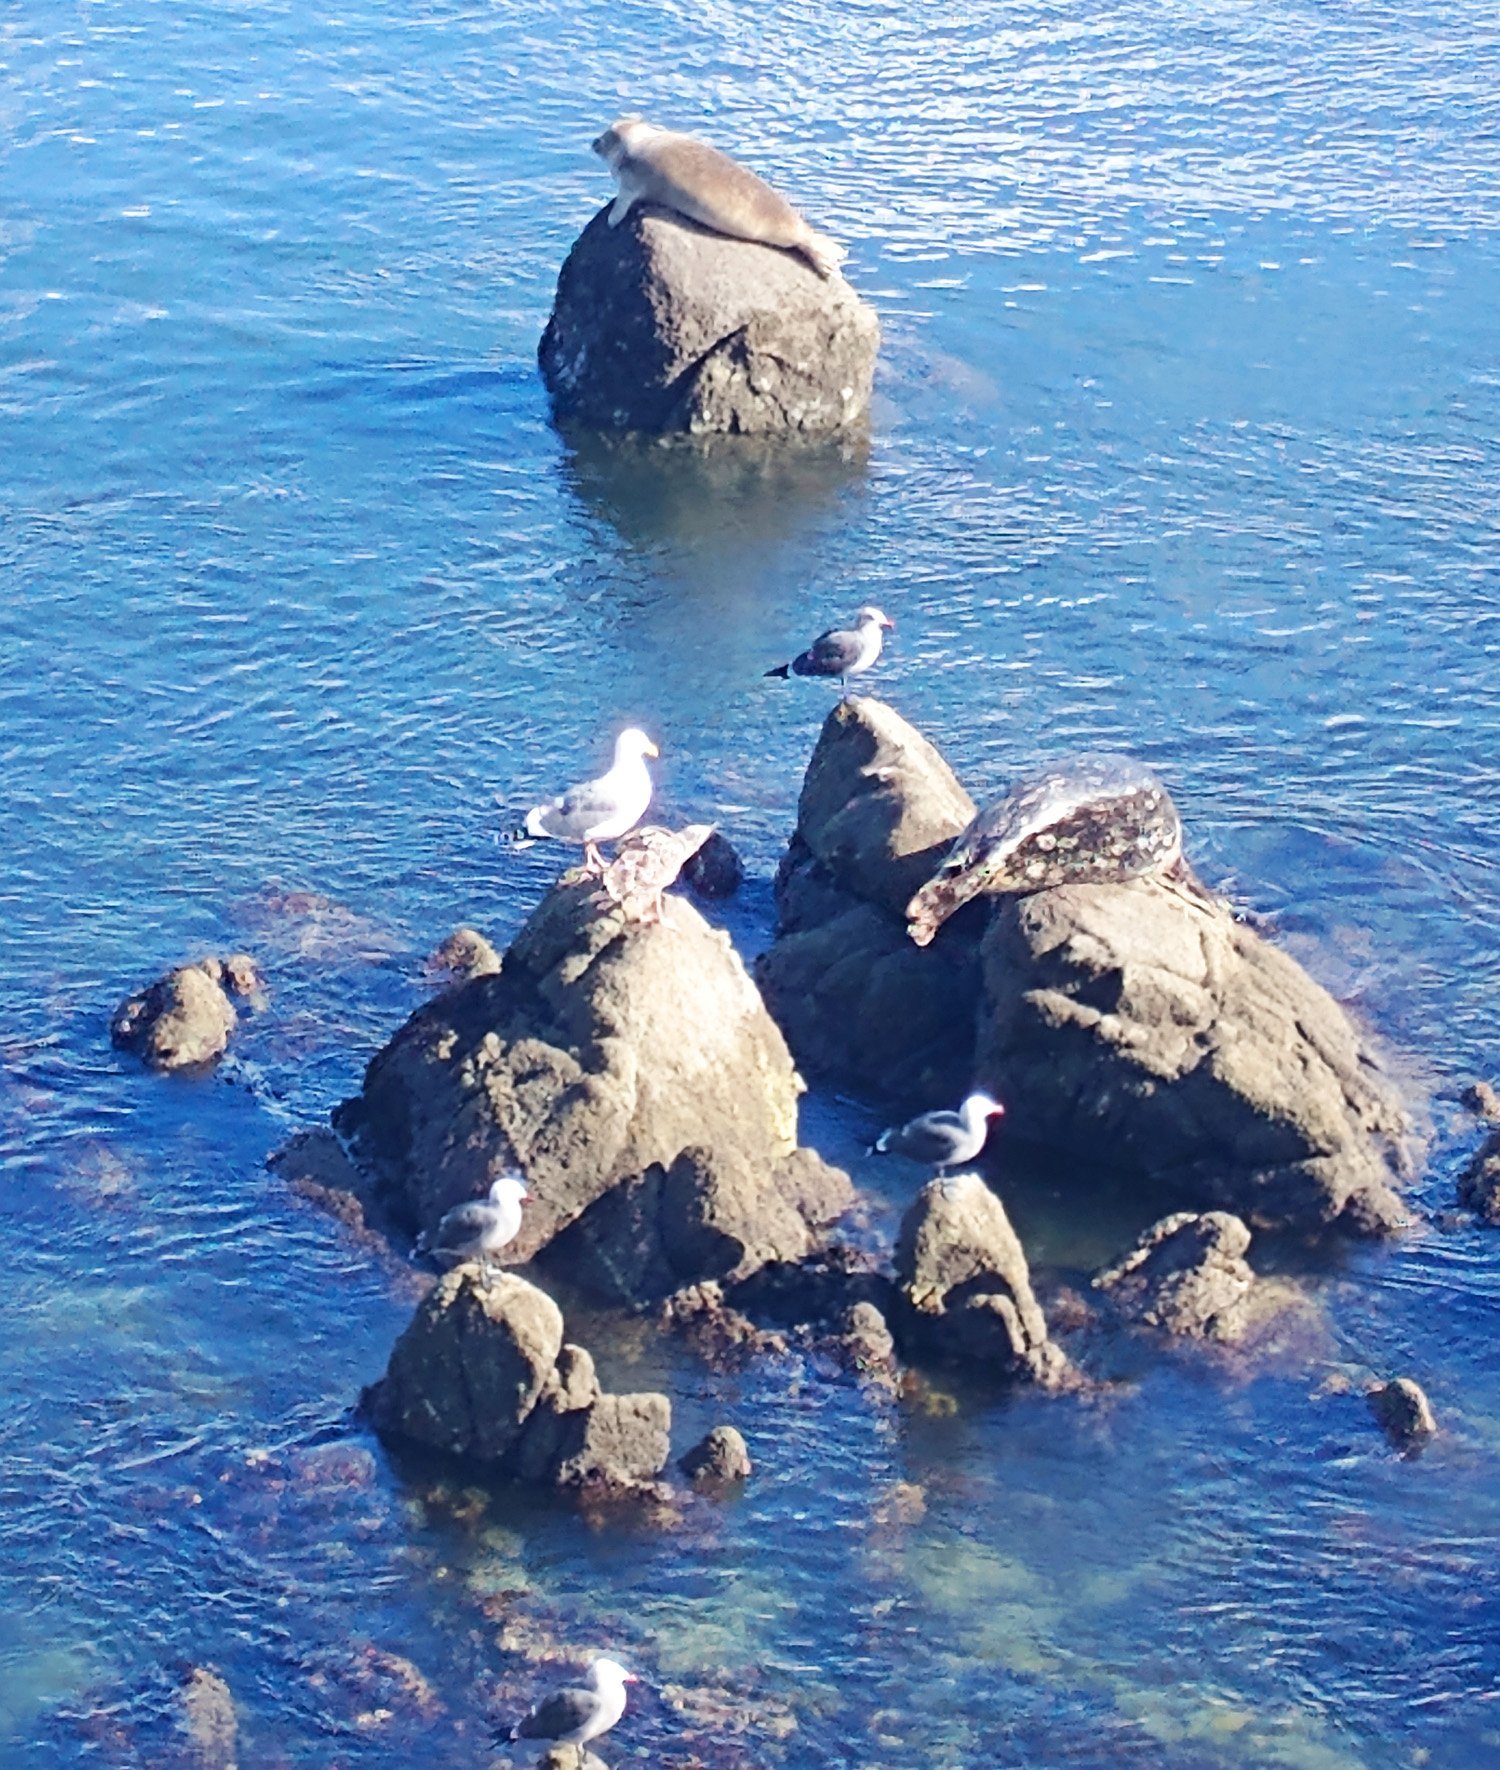 Seals just resting on their individual rocks, pretending to be comfortable.